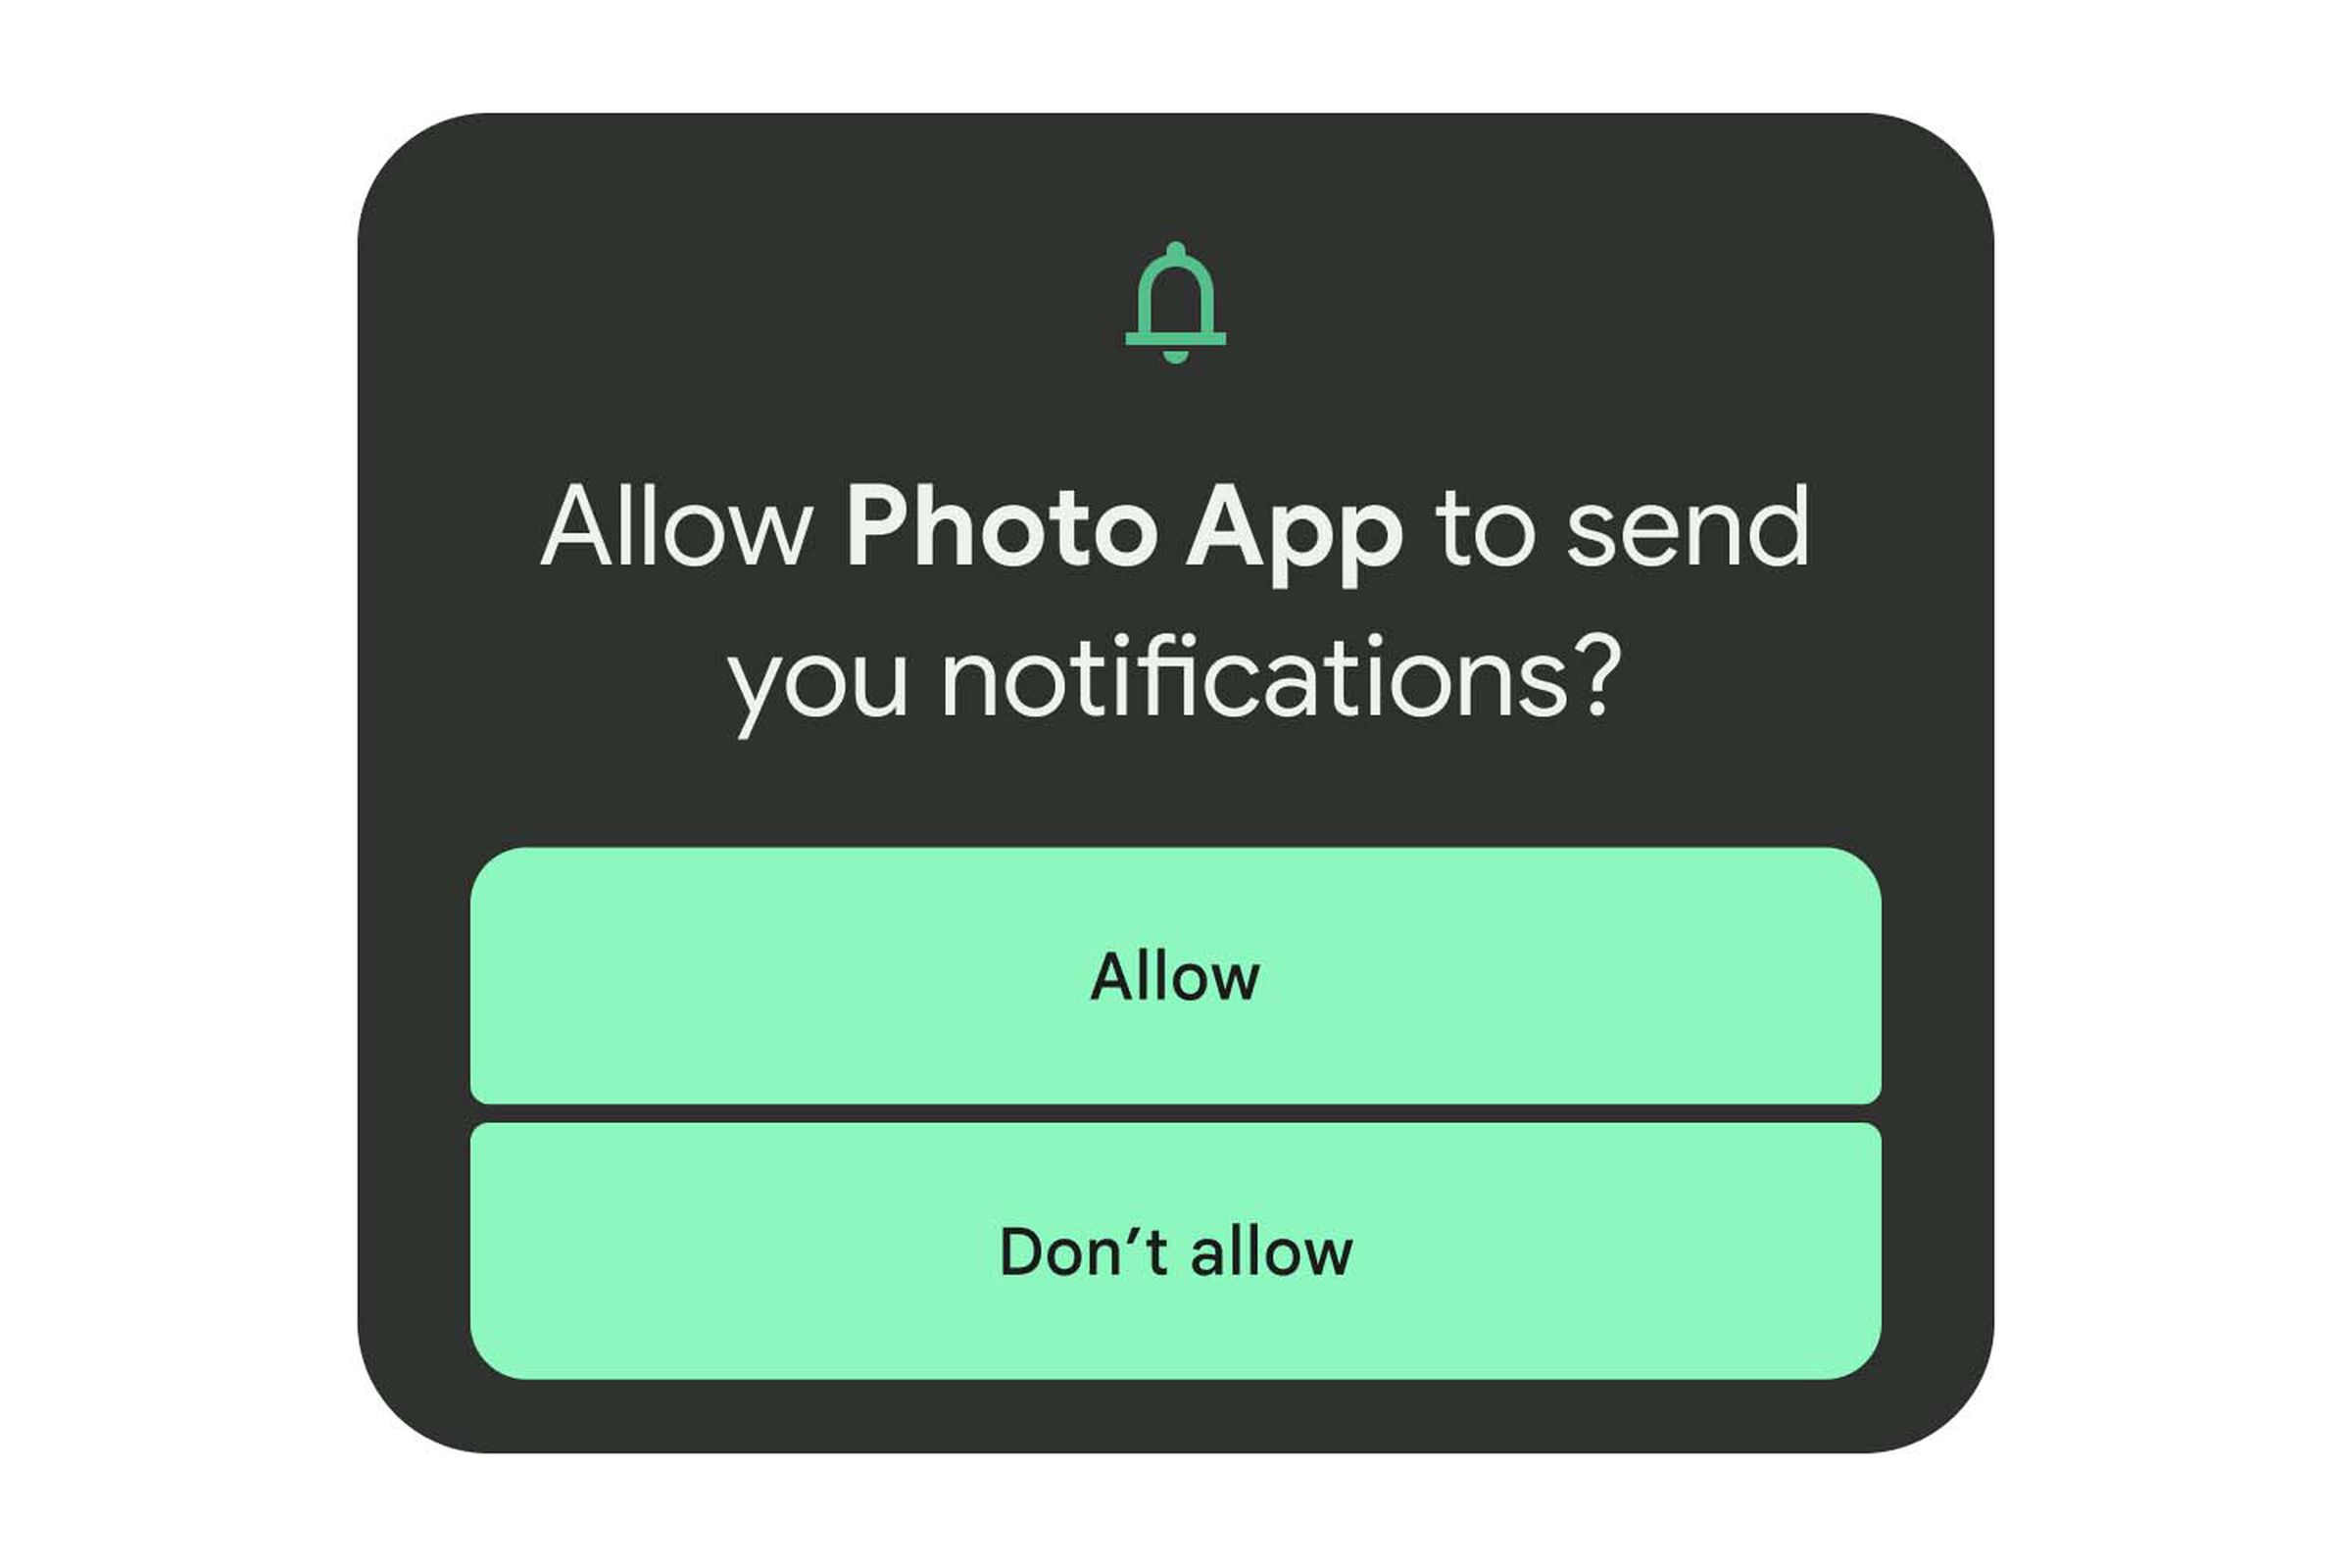 A new permission to allow apps to send notifications.